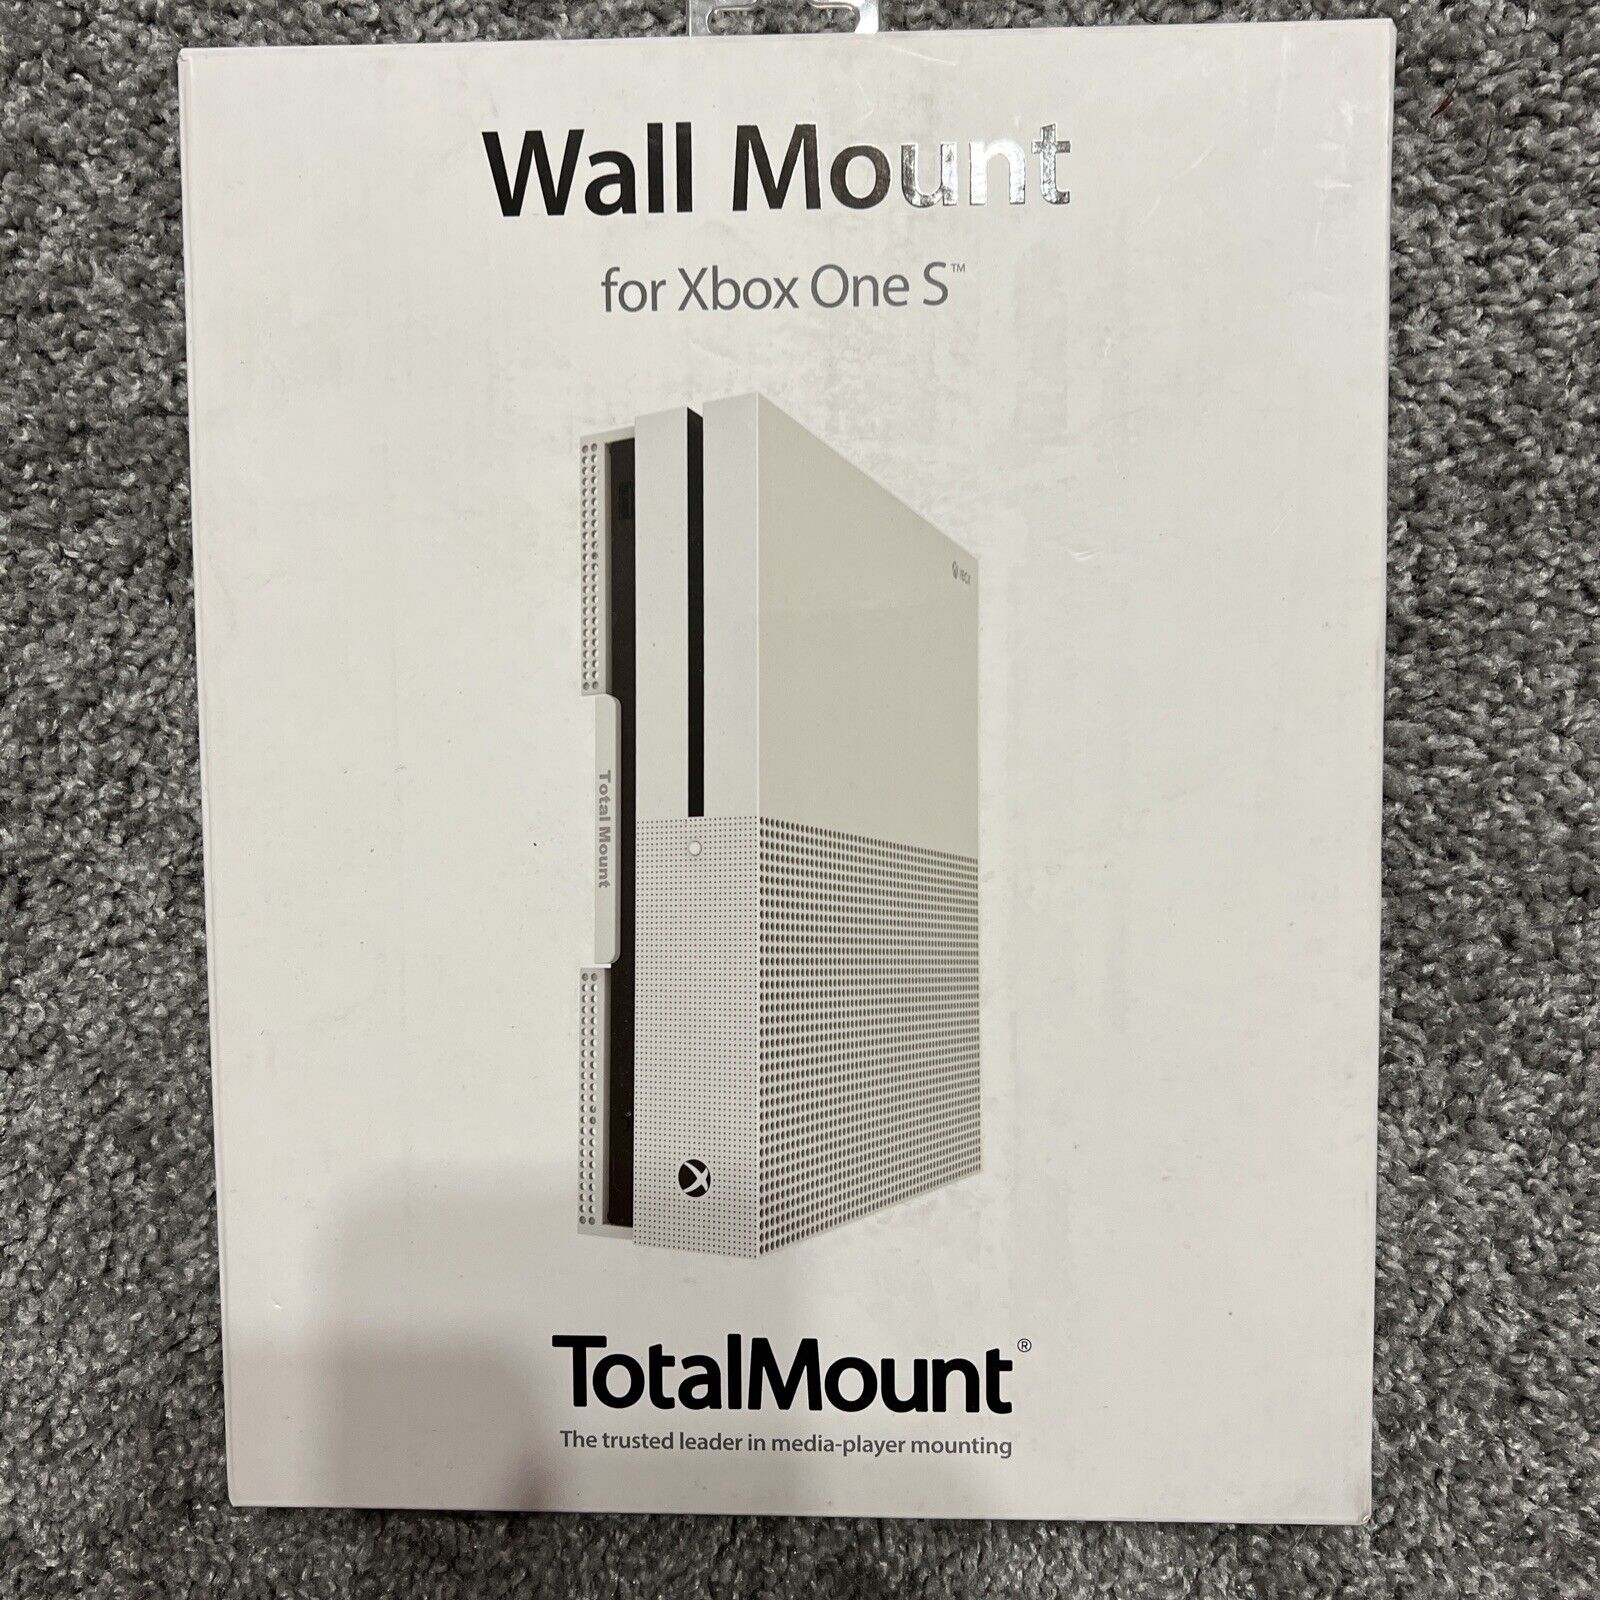 TotalMount for Xbox One S Mounts Xbox on Wall Near TV